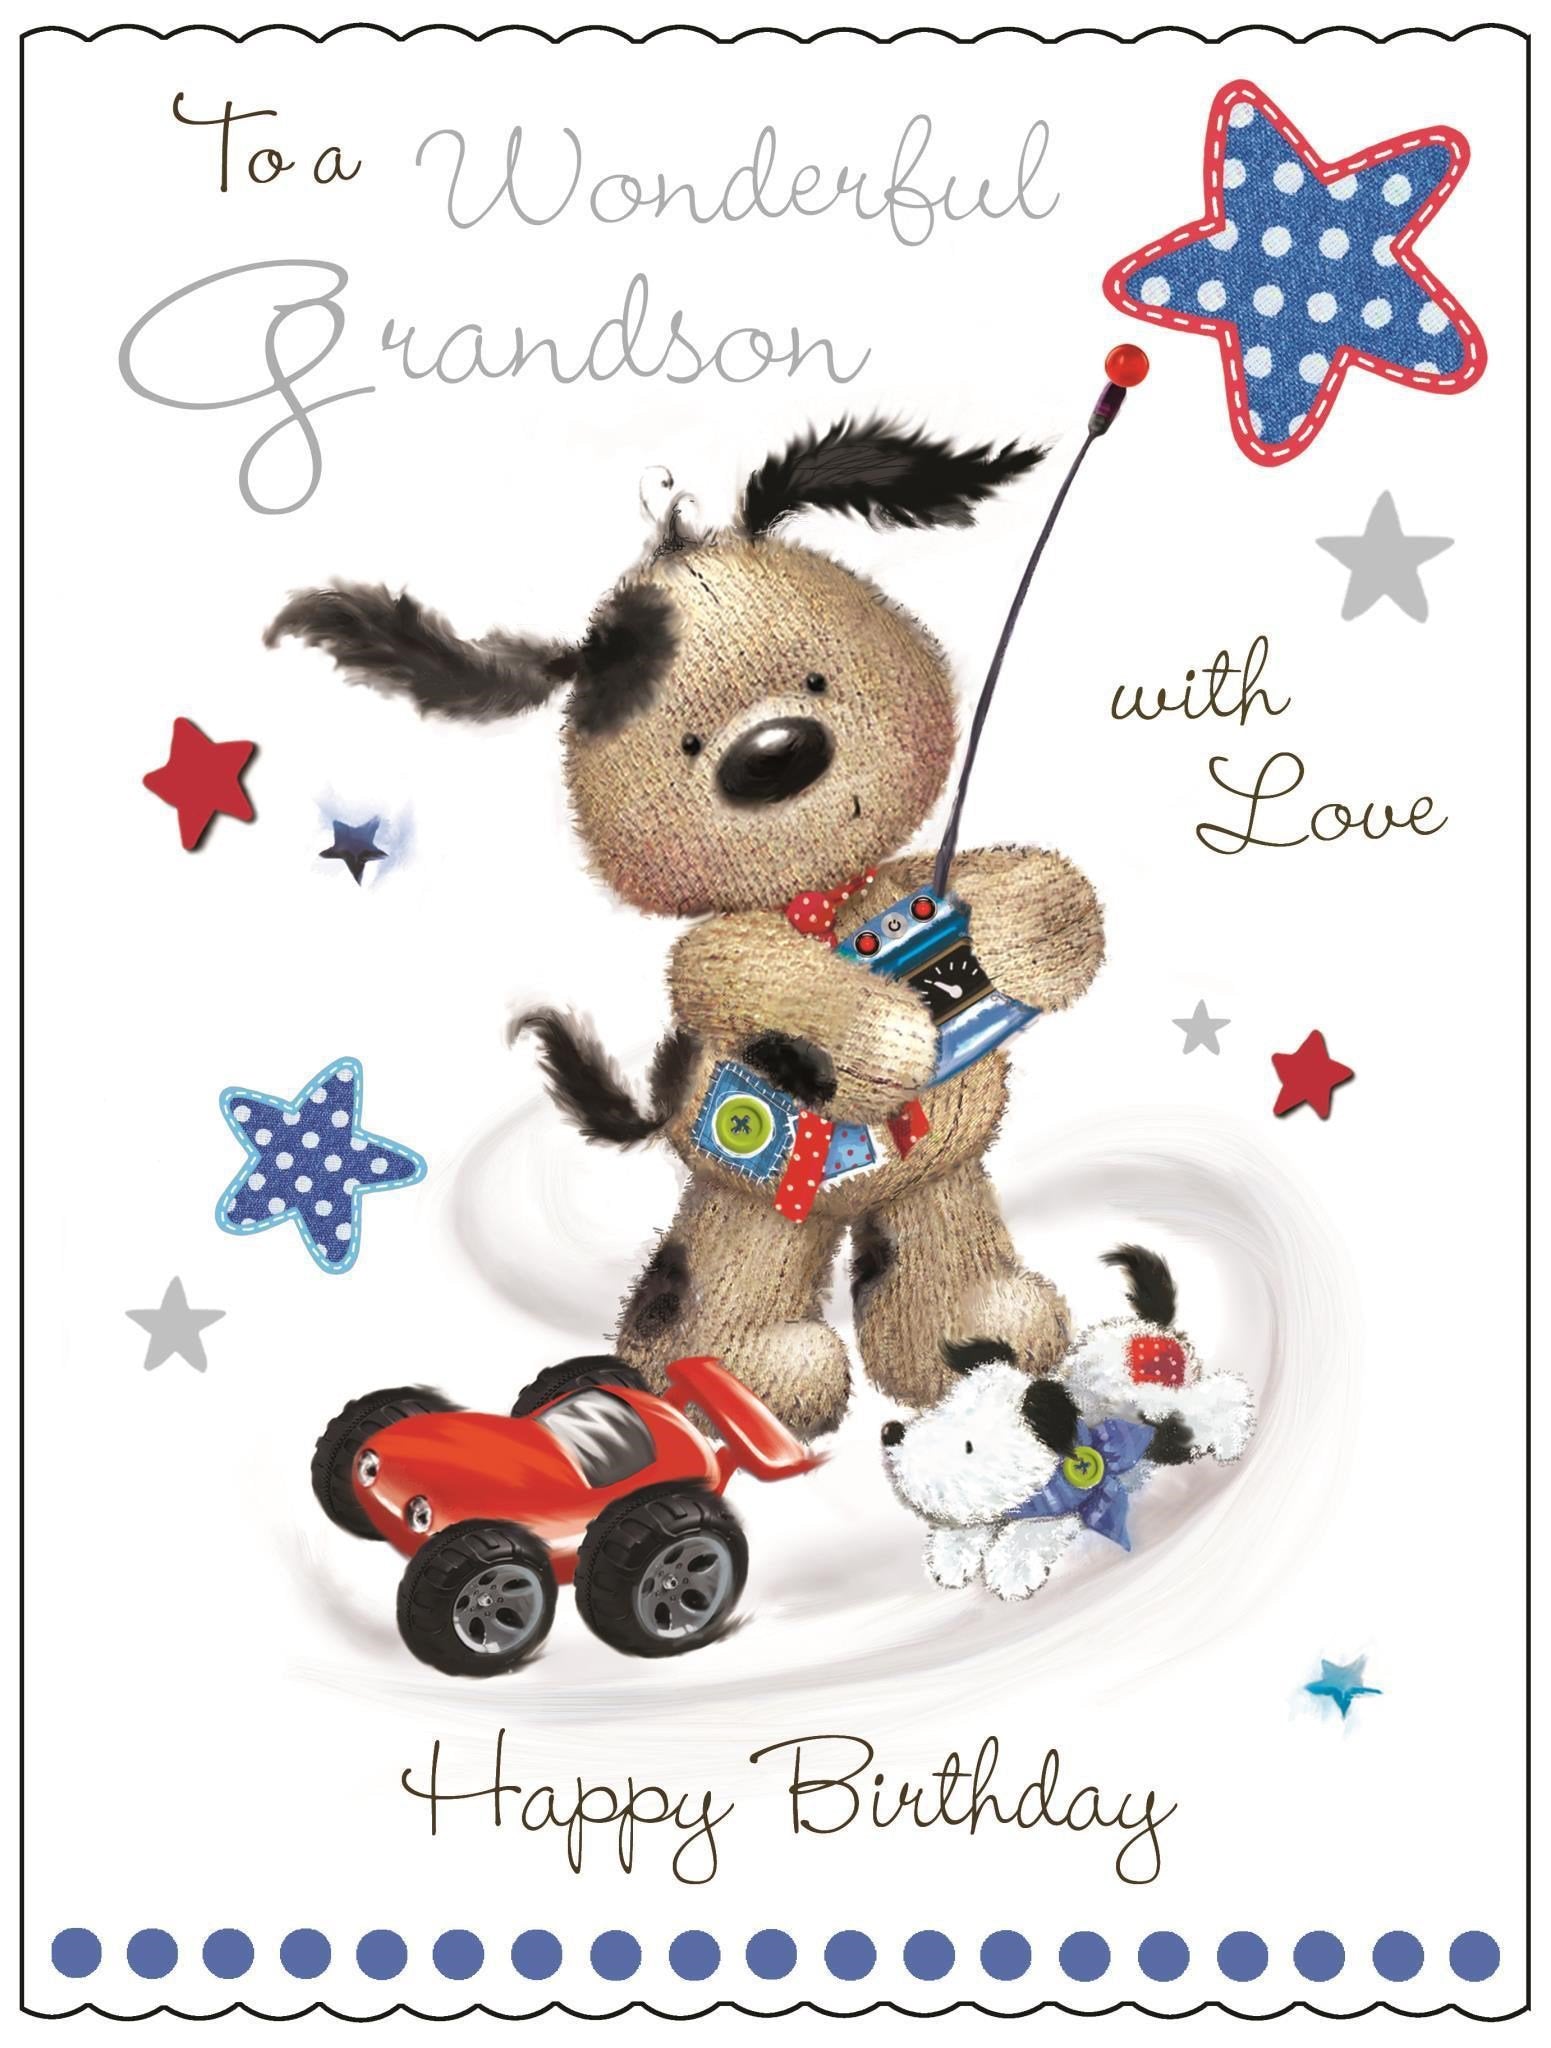 Front of Grandson Birthday Cute Greetings Card